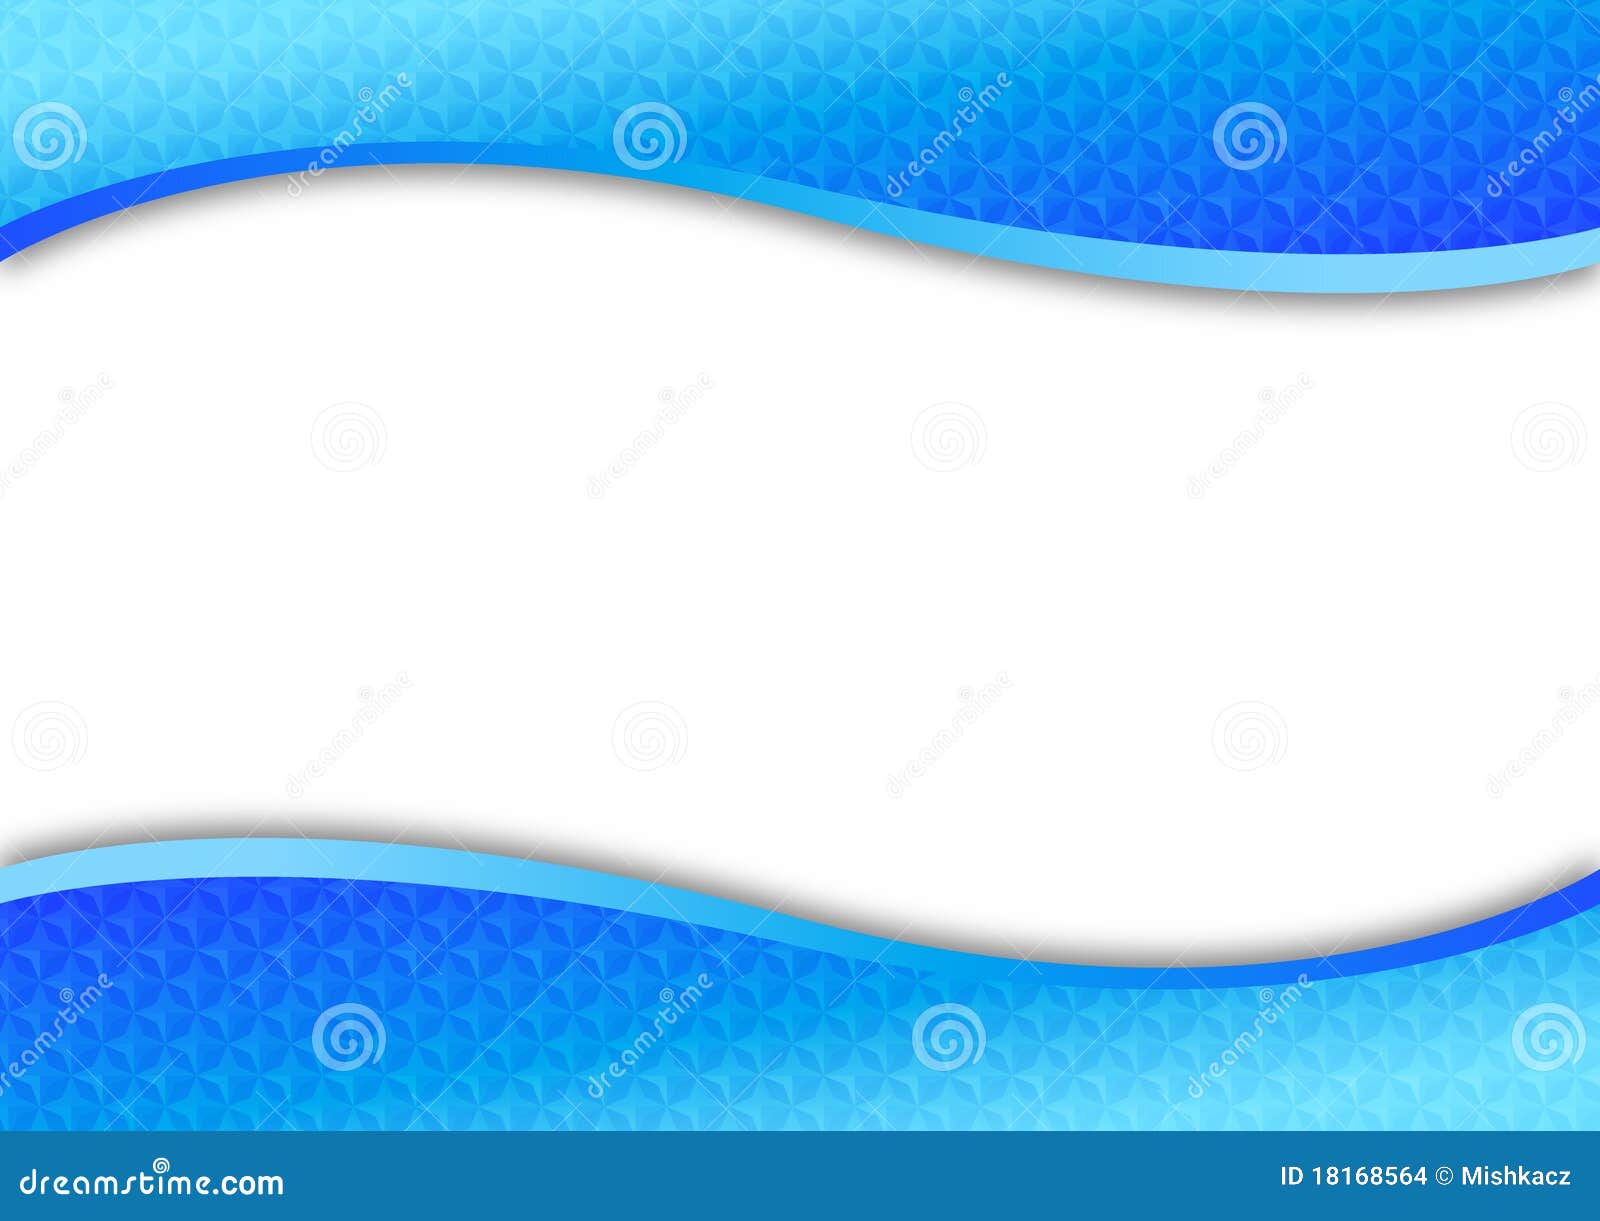 Corporate Business Template Background Stock Vector - Illustration of blue,  billboard: 18168564